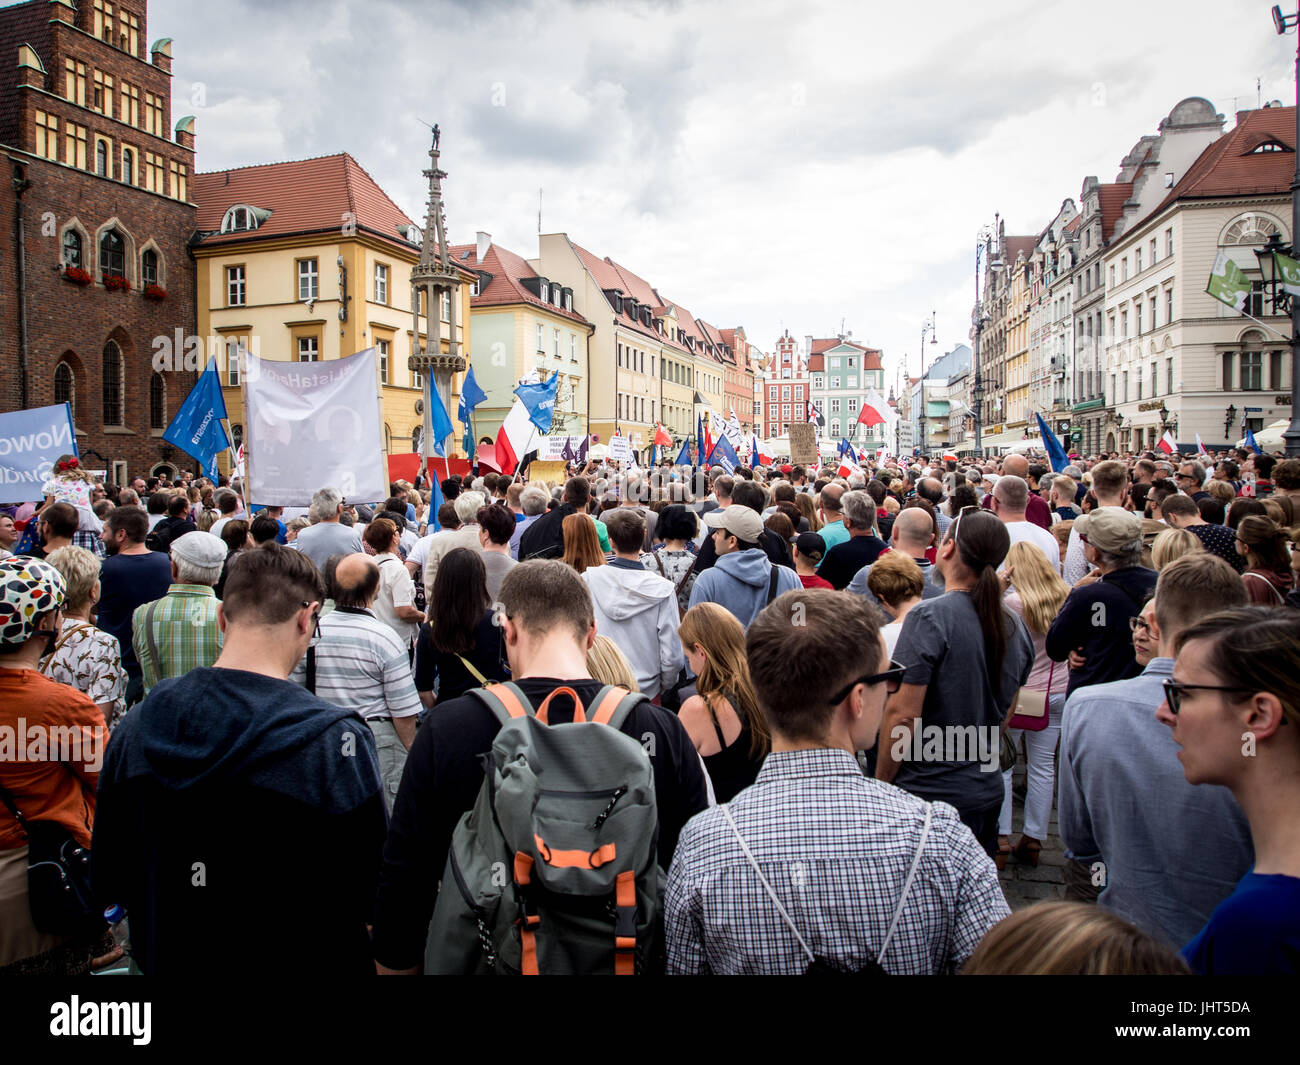 Wroclaw, Poland. 15th July, 2017. Members of the KOD (The committee for the defence of democracy) in Wroclaw an NGO that promotes European values such as Democracy, Rule of Law and Human Rights organised a massive rally and protest against the government led by the Law & Justice Party. There were Police in attendance but the demonstration went off peacefully. The crowd were addressed by several speakers from the KOD. Credit: Veteran Photography/Alamy Live News Stock Photo